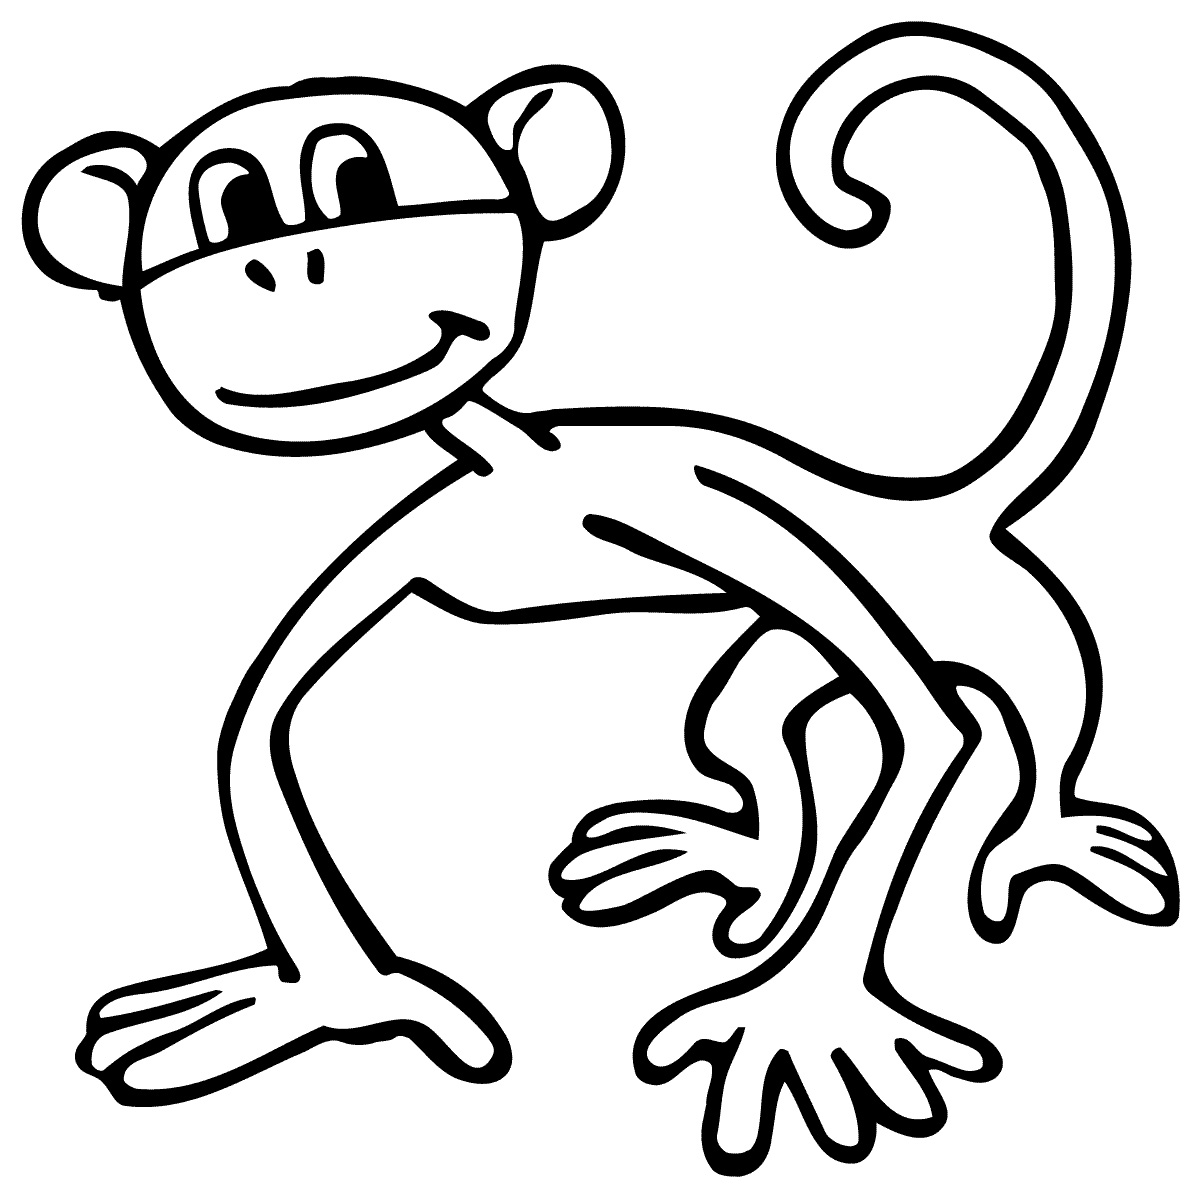 Girly Monkey Clip Art | Clipart Panda - Free Clipart Images